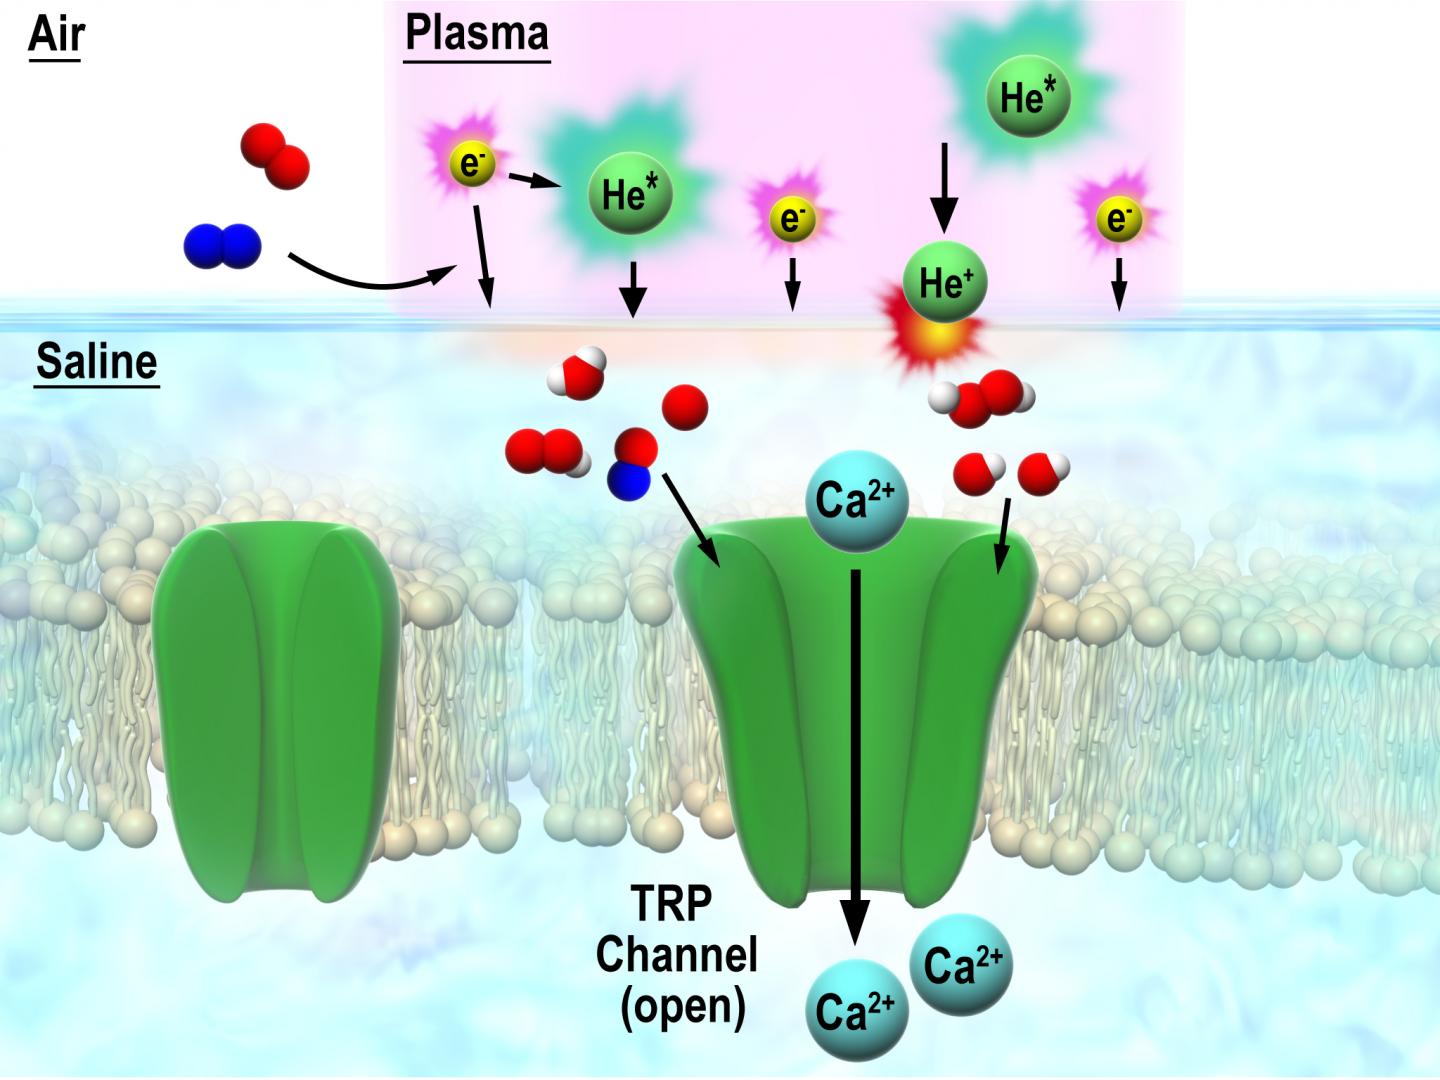 Novel insight into Interaction Between Discharge Plasma and Cells via TRP Channel